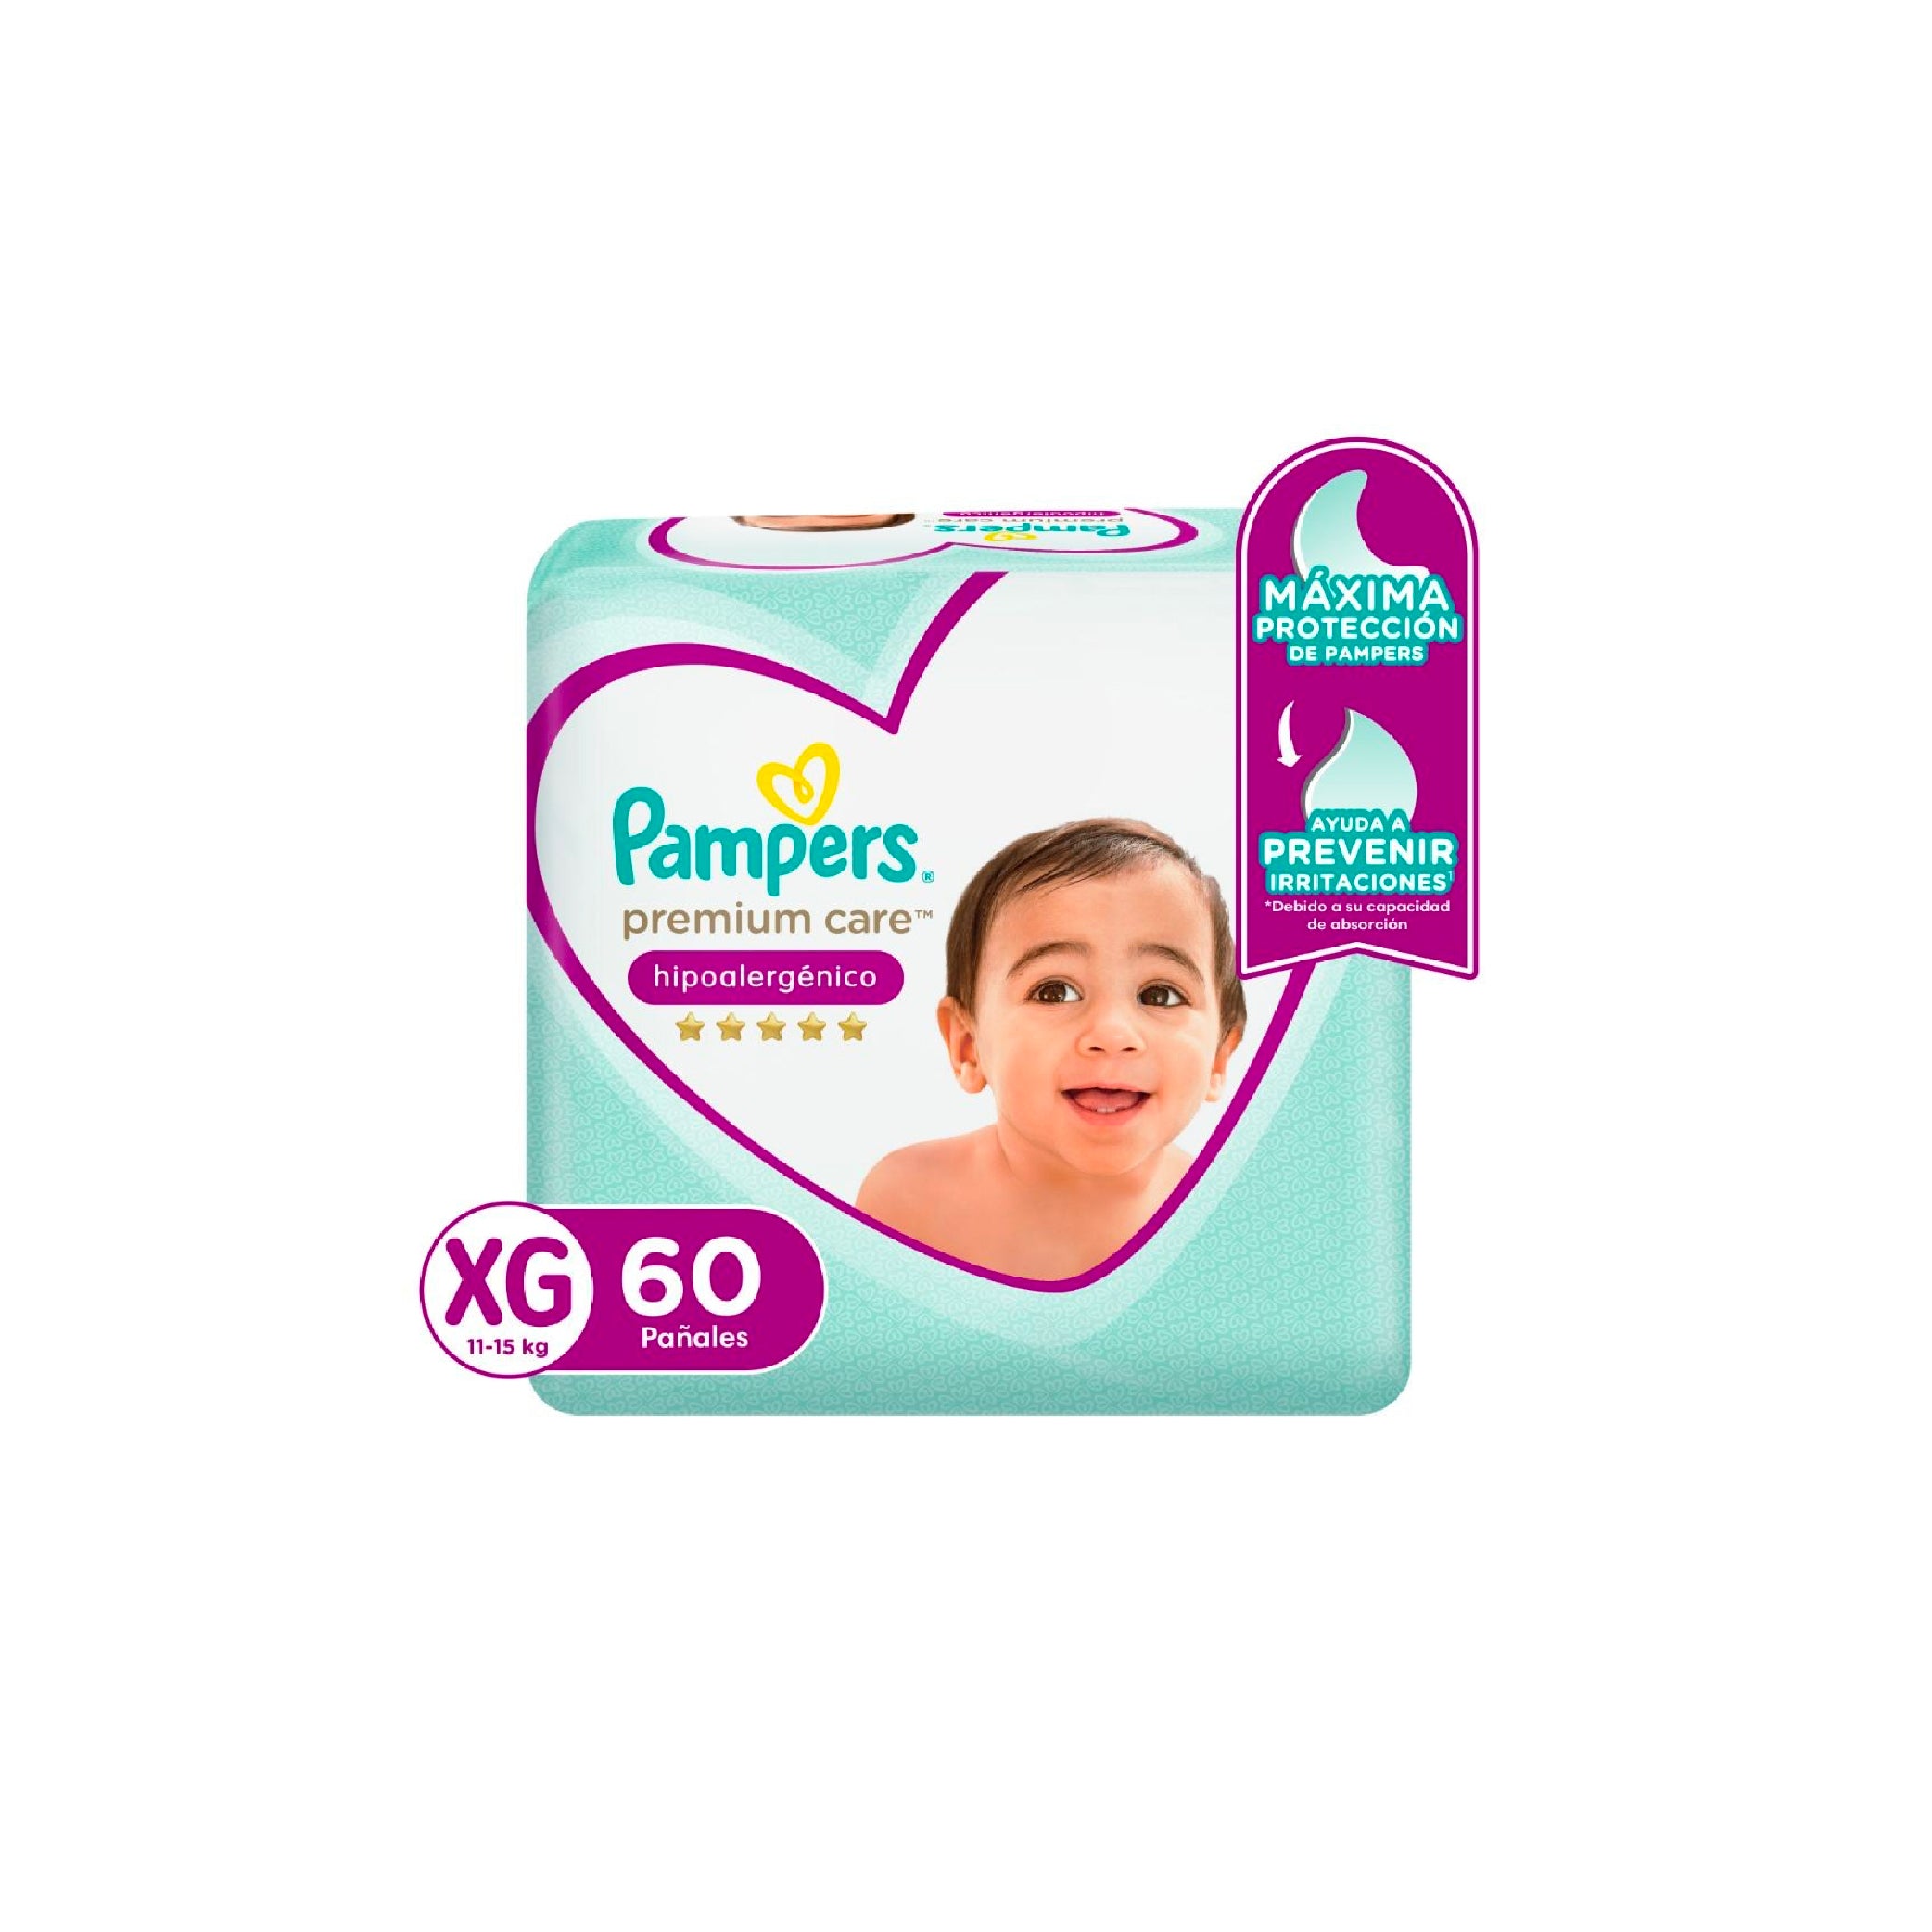 PAMPERS PAÑALES PREMIUM CARE XG X60